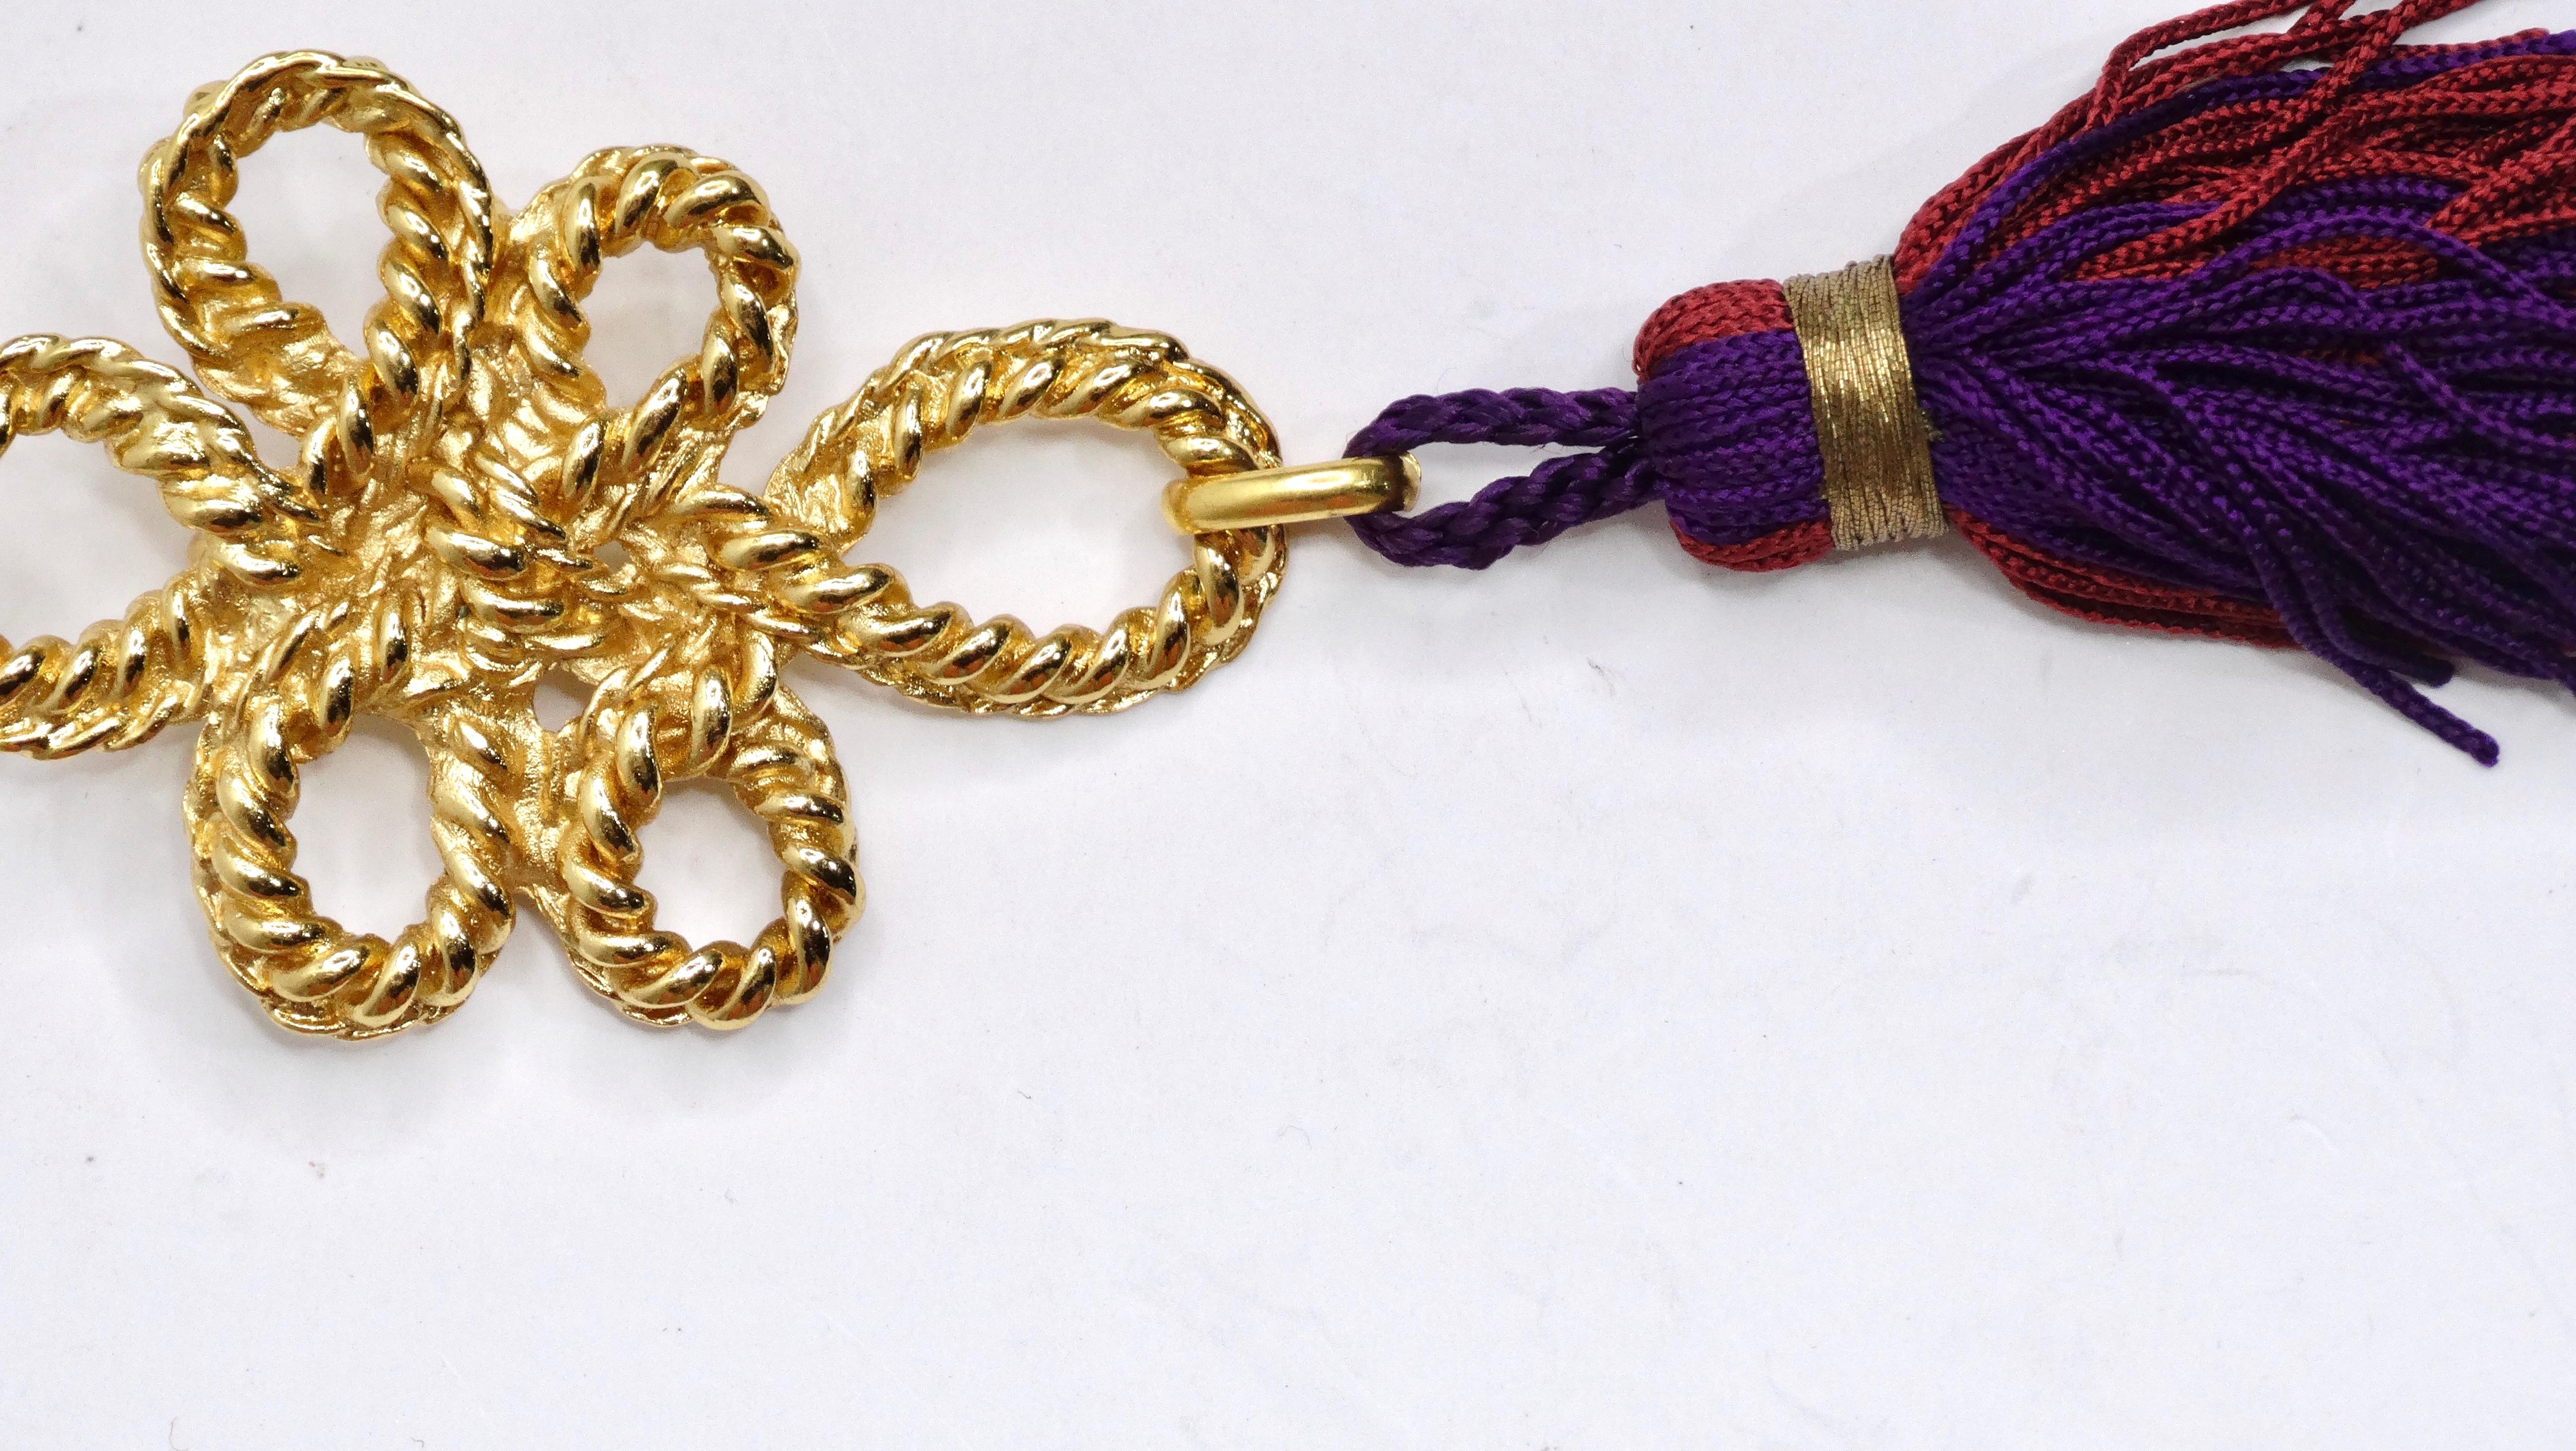 Add a little tassel flair to your brooch collection! Adding movement to your outfit will add a fun and playful  aspect. This is a beautifully unique Yves Saint Laurent brooch with a metal entwined/ knotted rope pendant in a rich and bright gold.